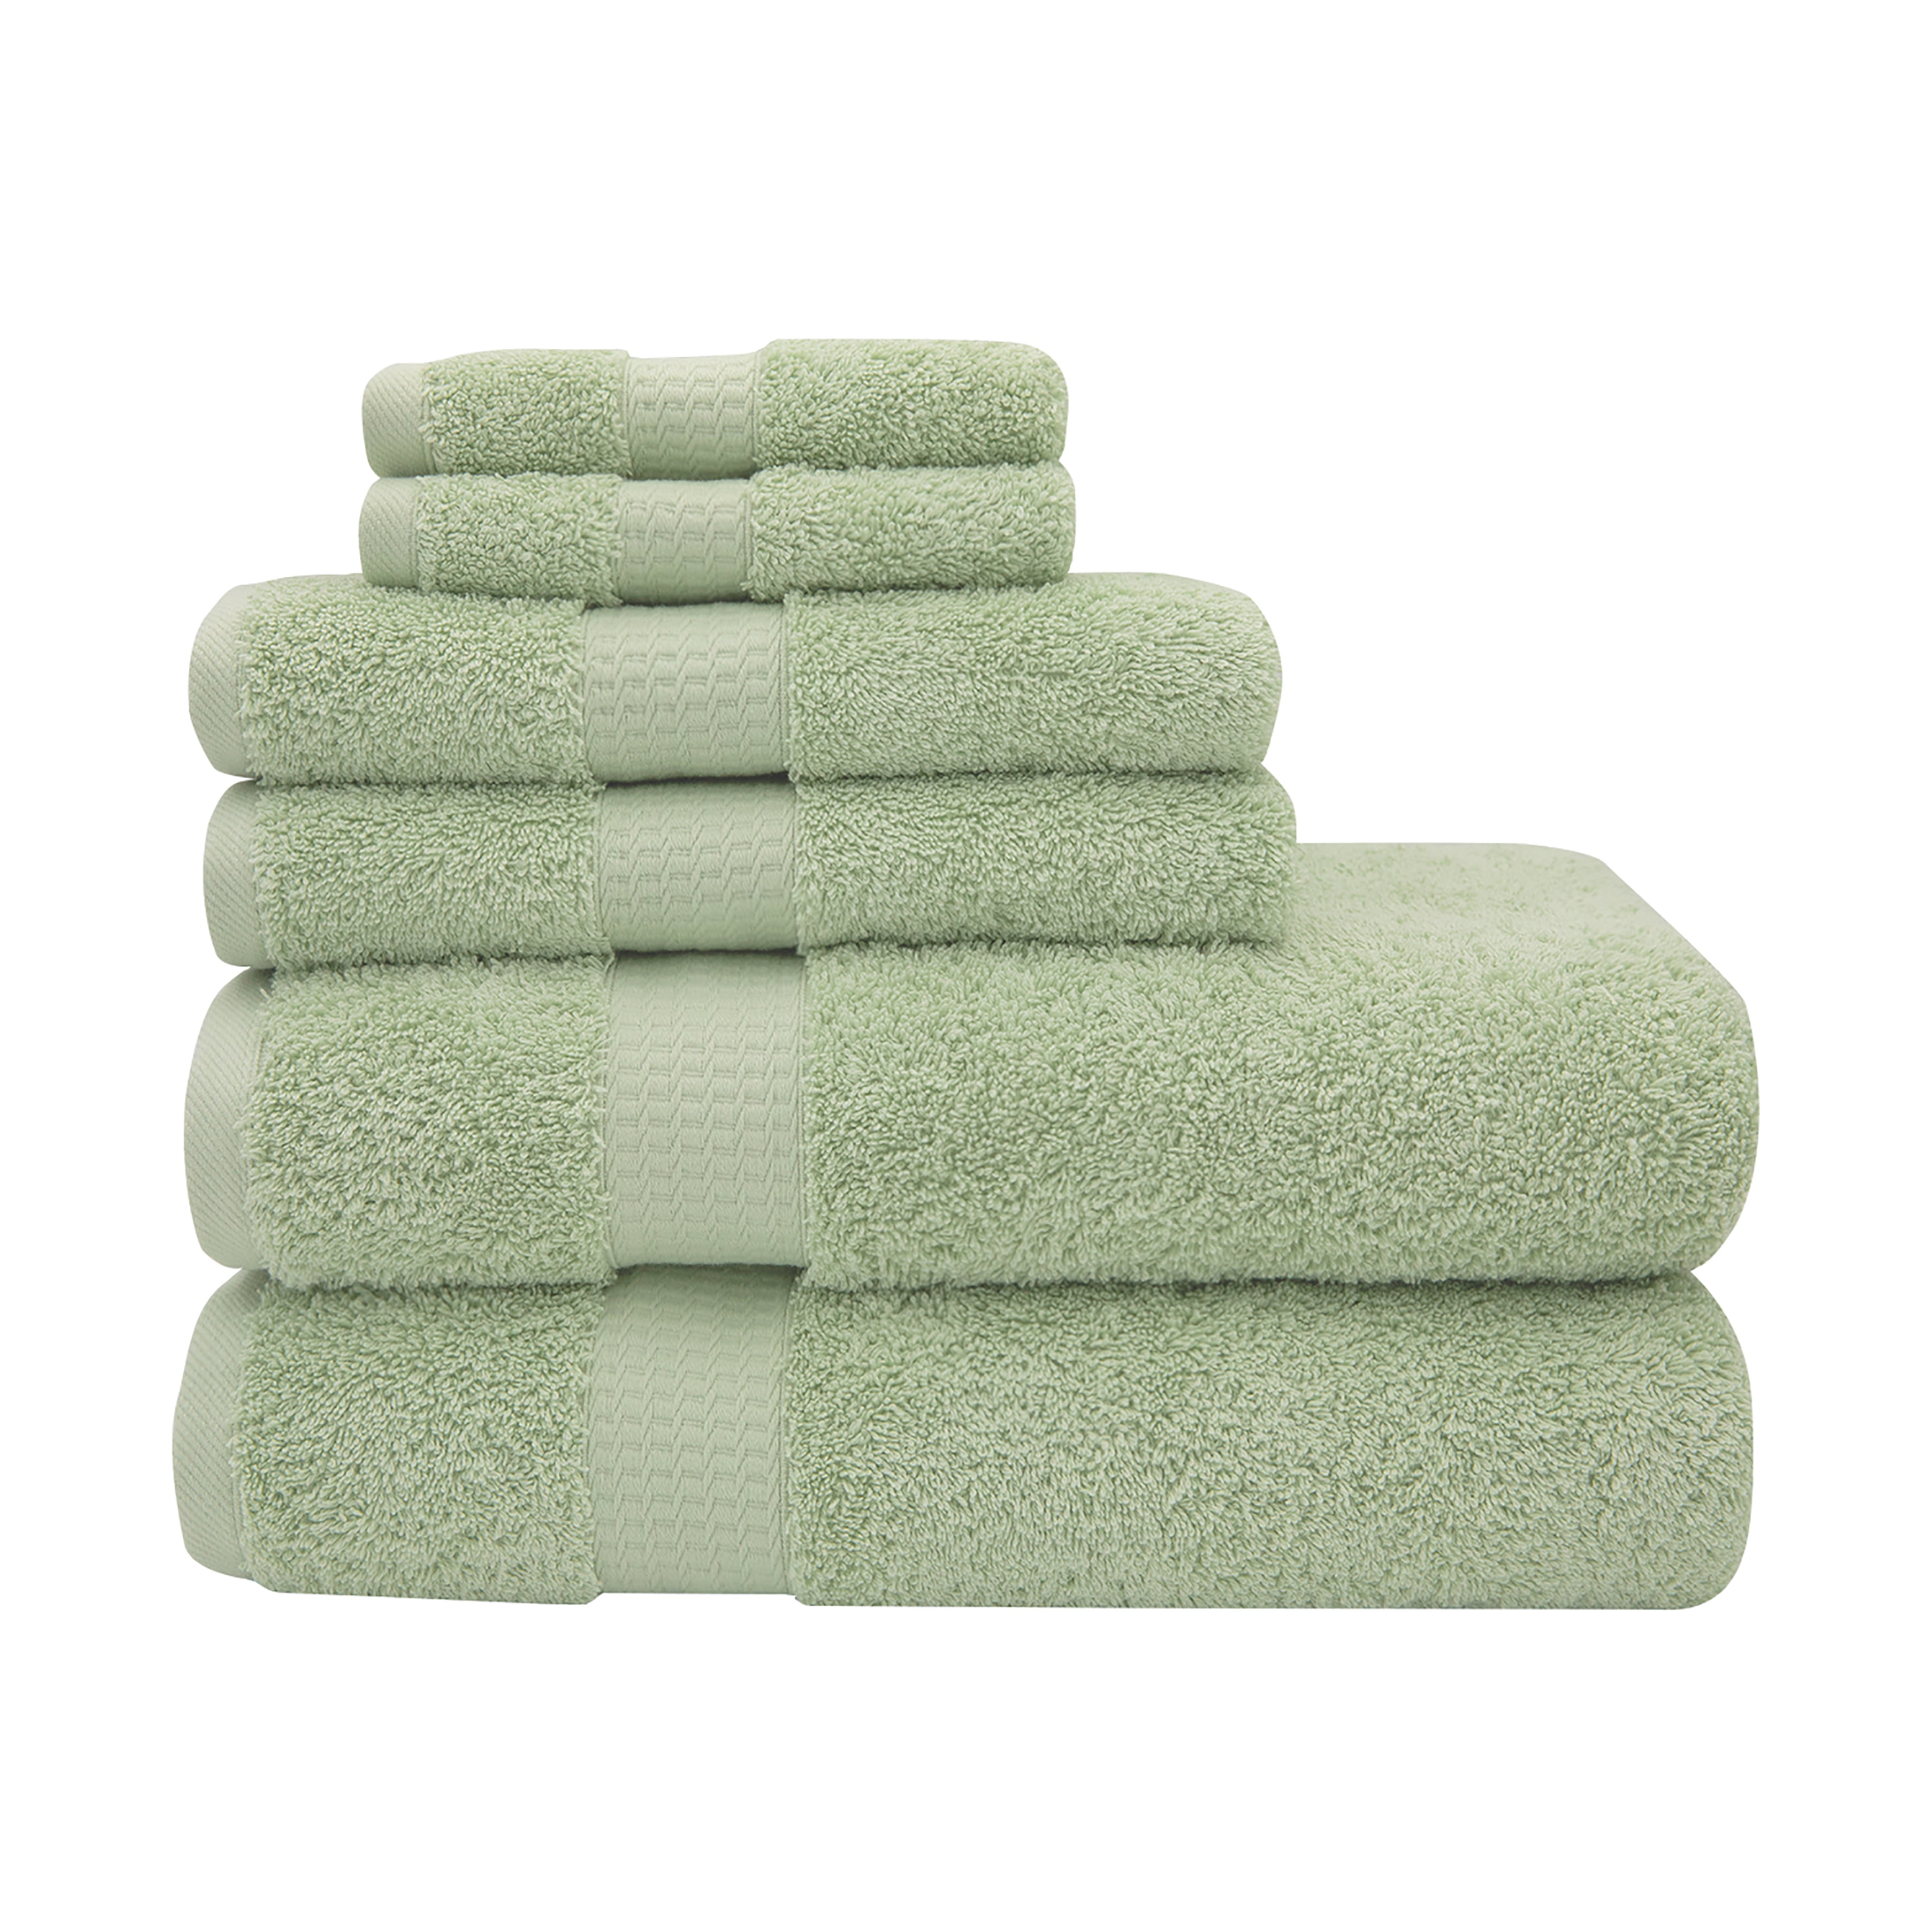 Pyramid Excel Hotel 100-Percent Ring Spun Cotton Bath Towels - 3 Pack 